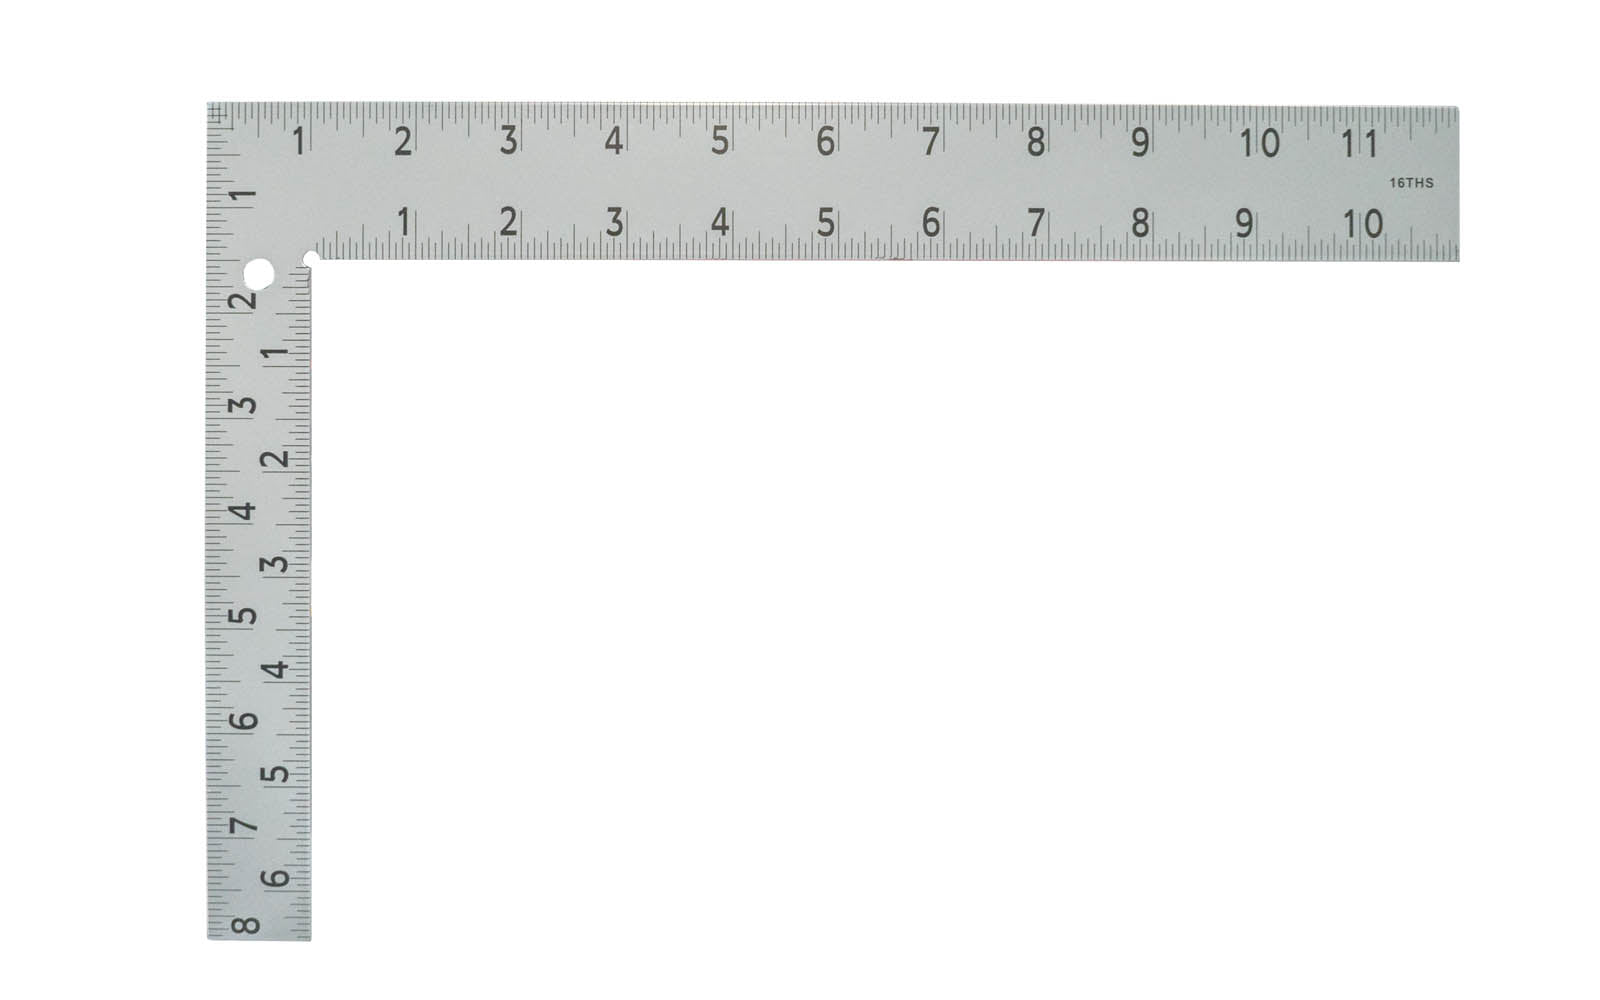 Johnson Level's 8" x 12" steel carpenter square features "EZ Read" thermal bonded numbers & 1/8" graduations for easy visibility. It's rugged steel construction makes the square durable enough to withstand even the worst jobsite abuse. 049448270101. 12" x 1-1/2" body, 8" x 1" tongue, 1/8" thick. Model CS10